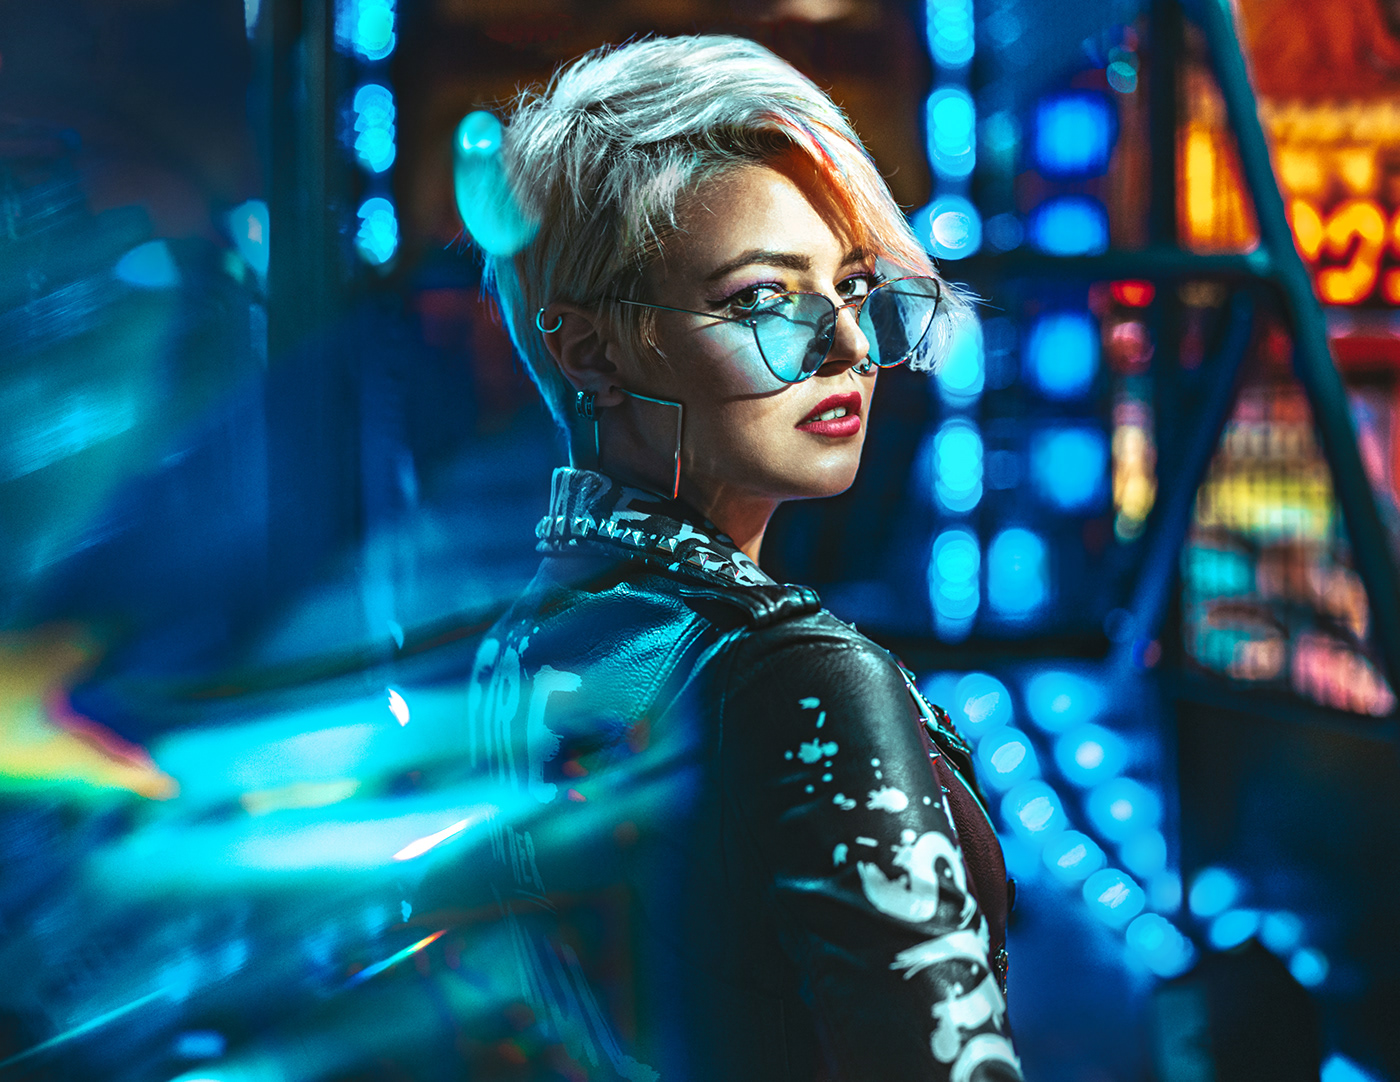 caleidoscopio colors Creative Photography Cyberpunk fashion photography neon prism refraction abstract colorful